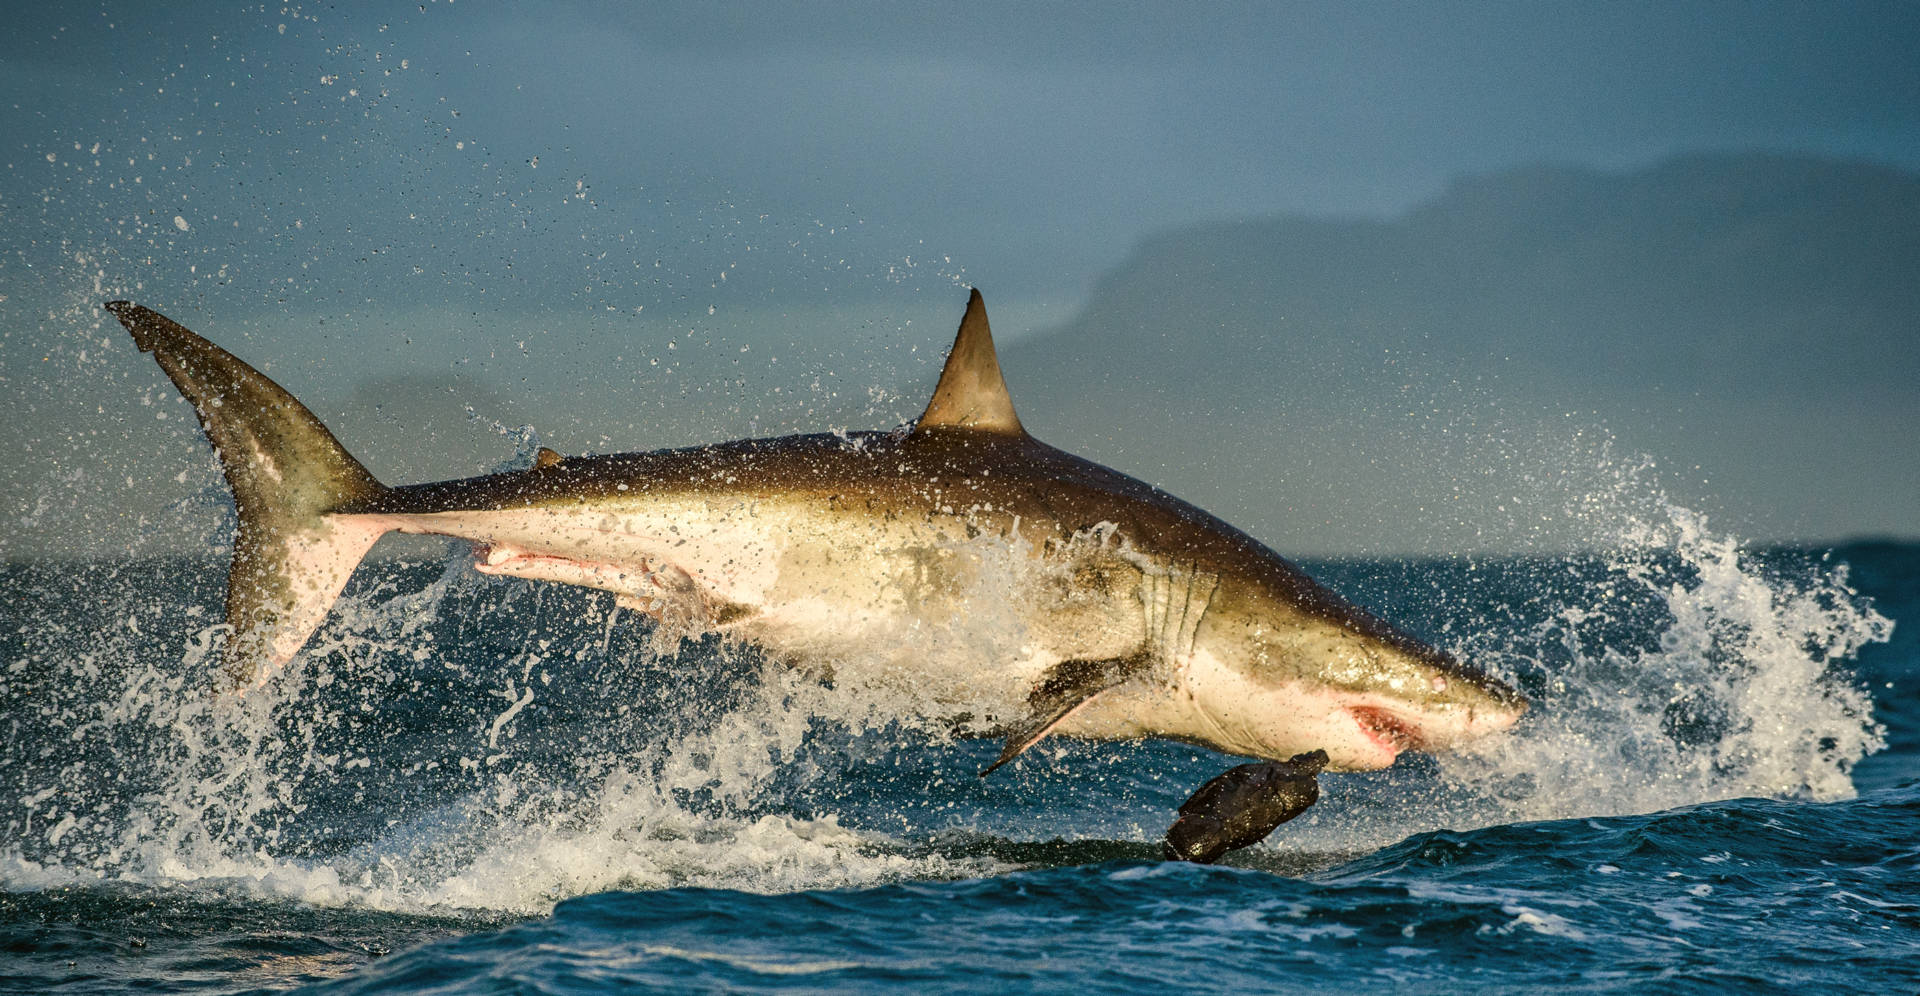 A White Shark leaps out of the water.